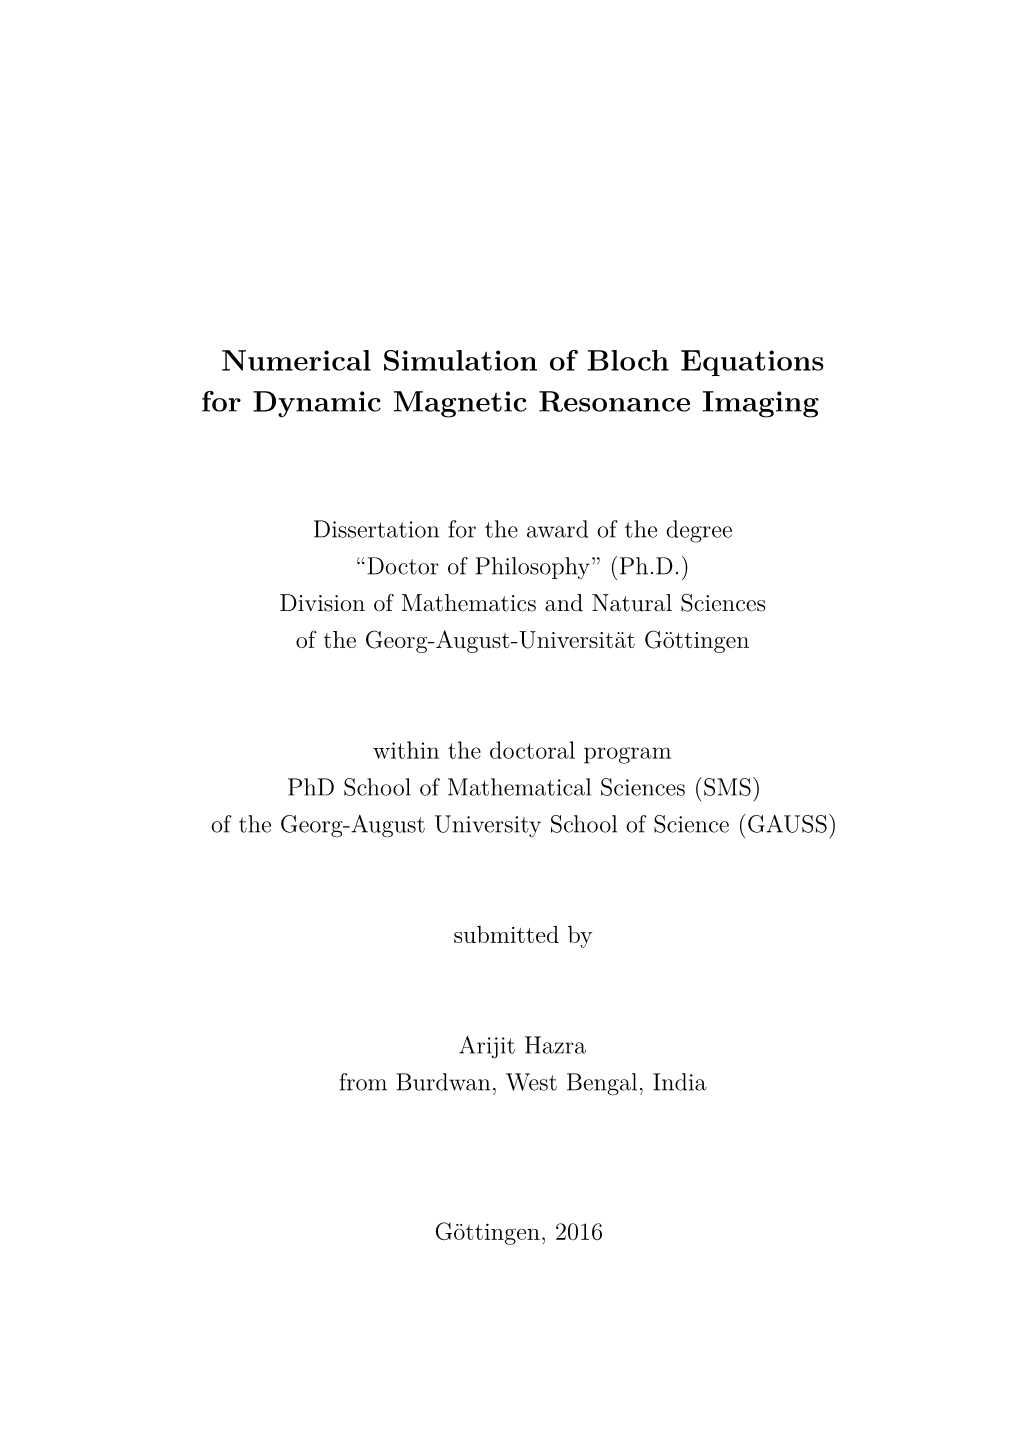 Numerical Simulation of Bloch Equations for Dynamic Magnetic Resonance Imaging